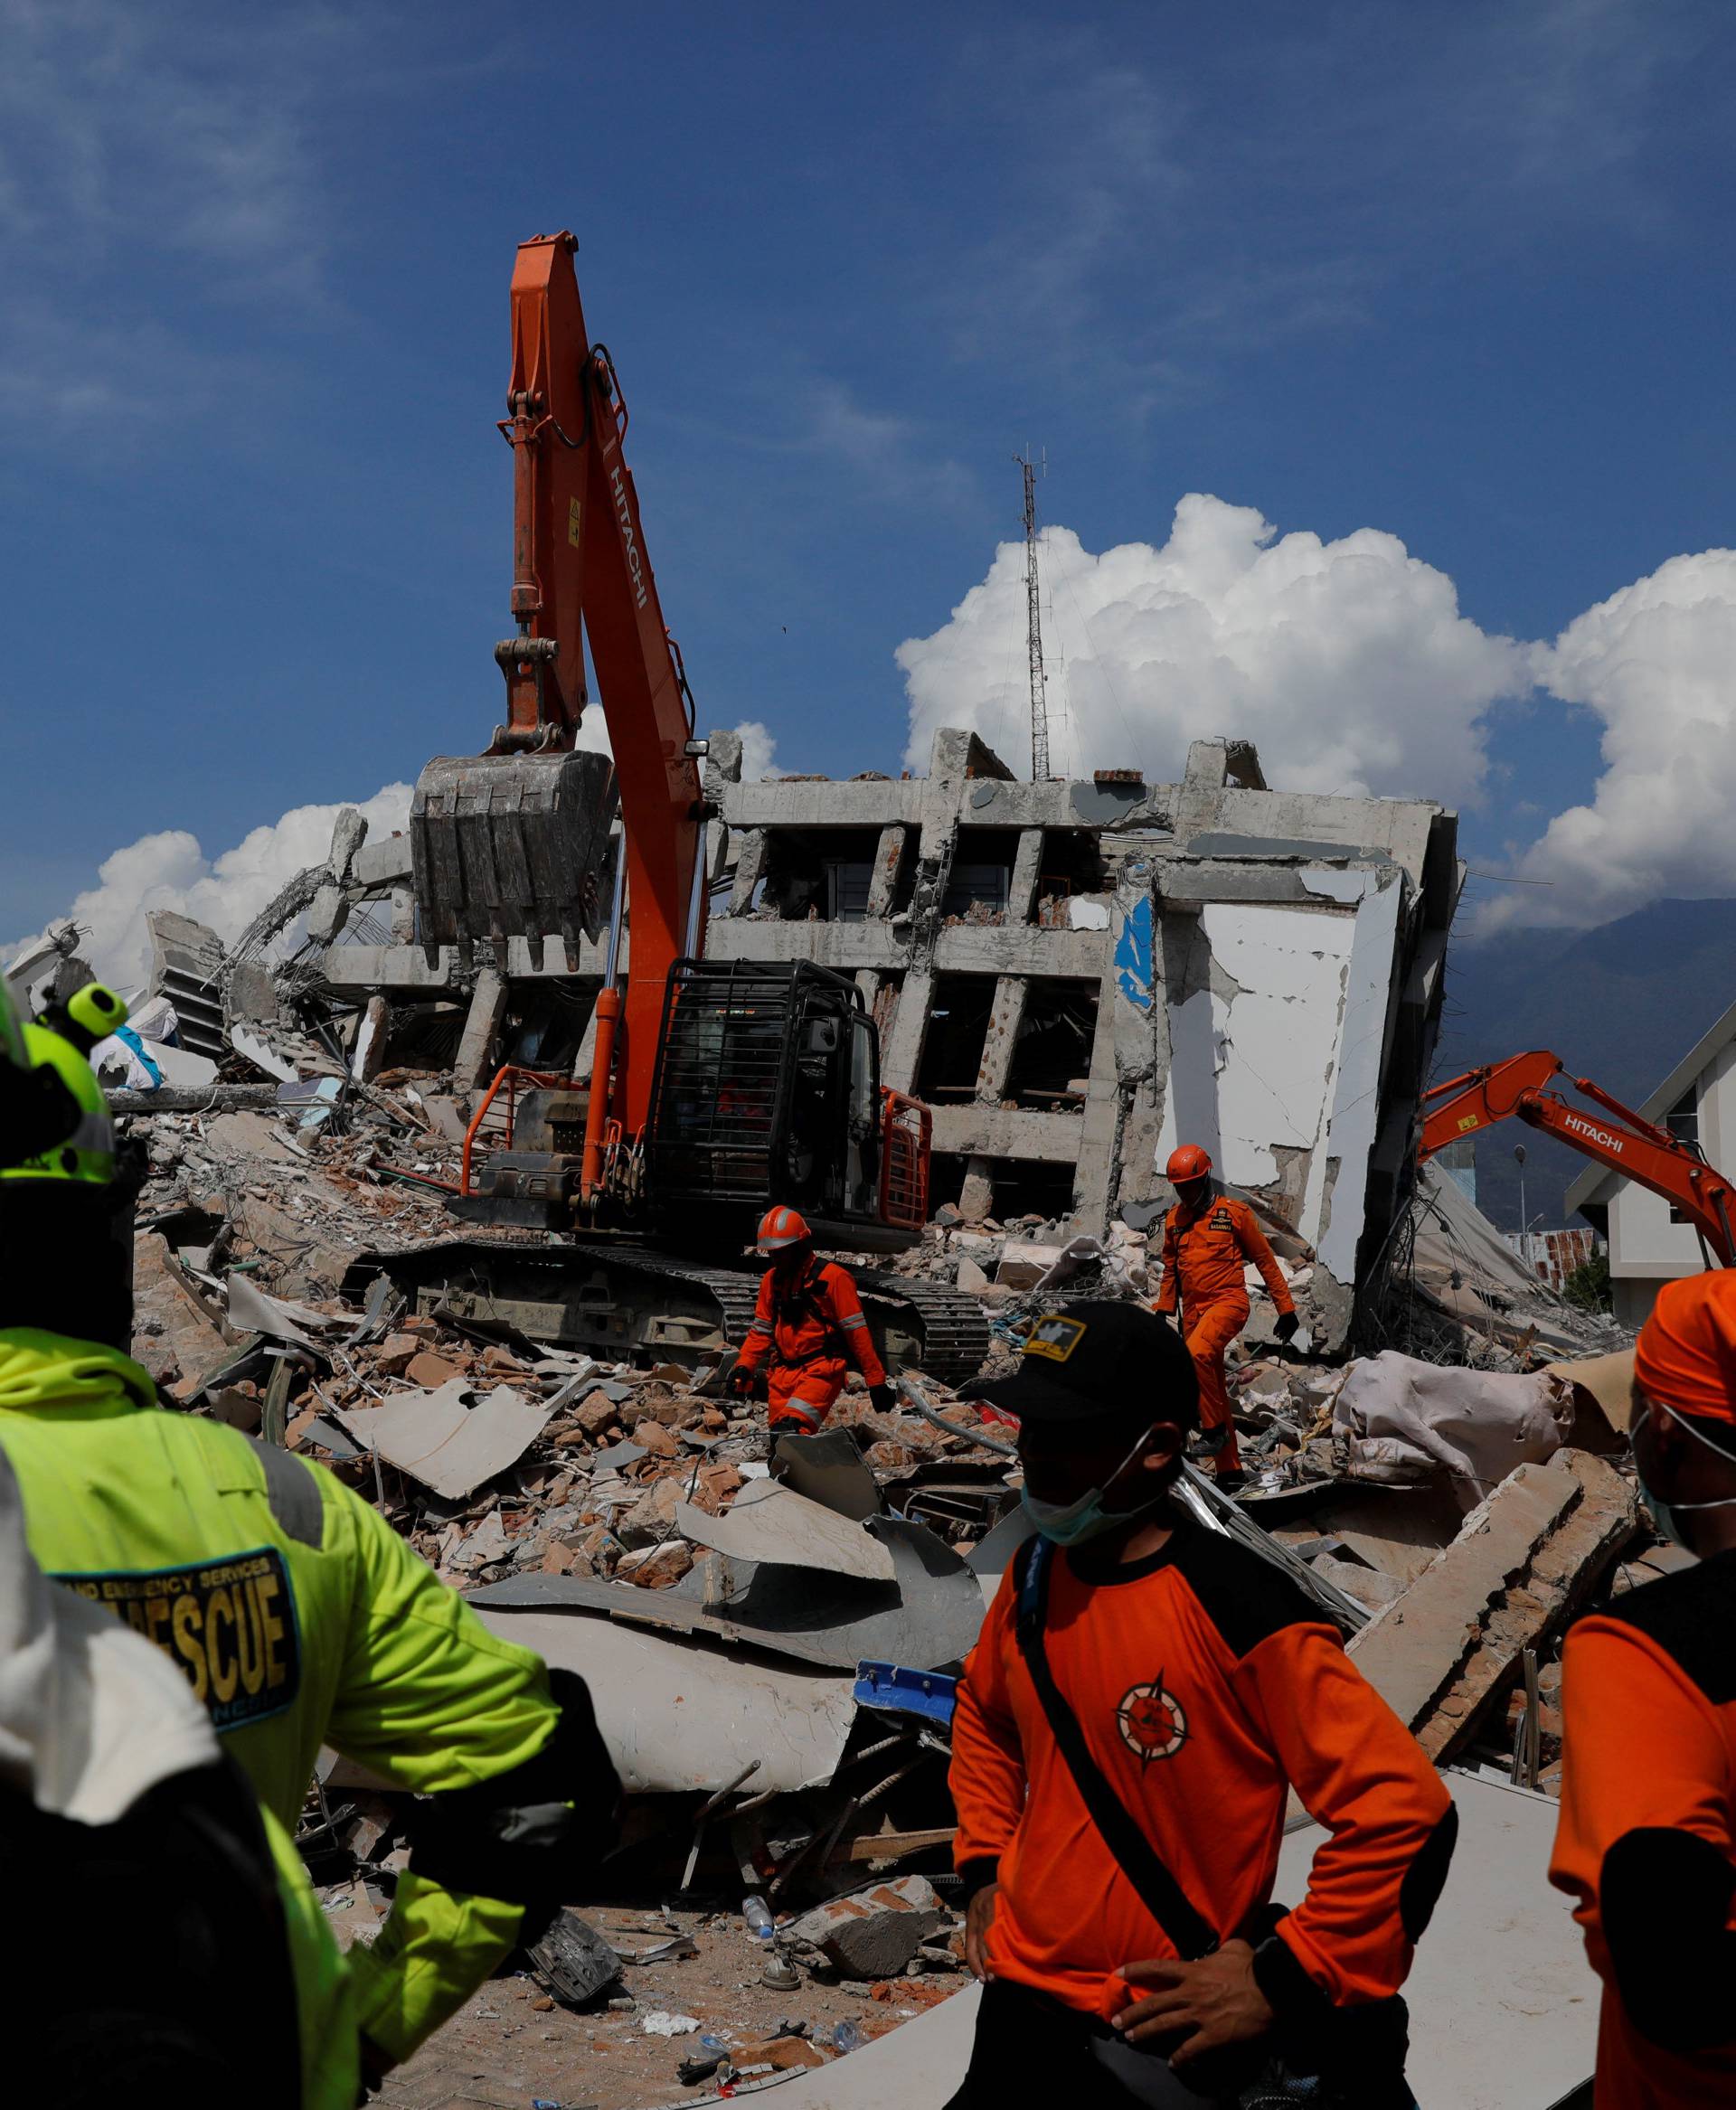 Rescue team members work among the ruins of Roa-Roa hotel after the earthquake in Palu